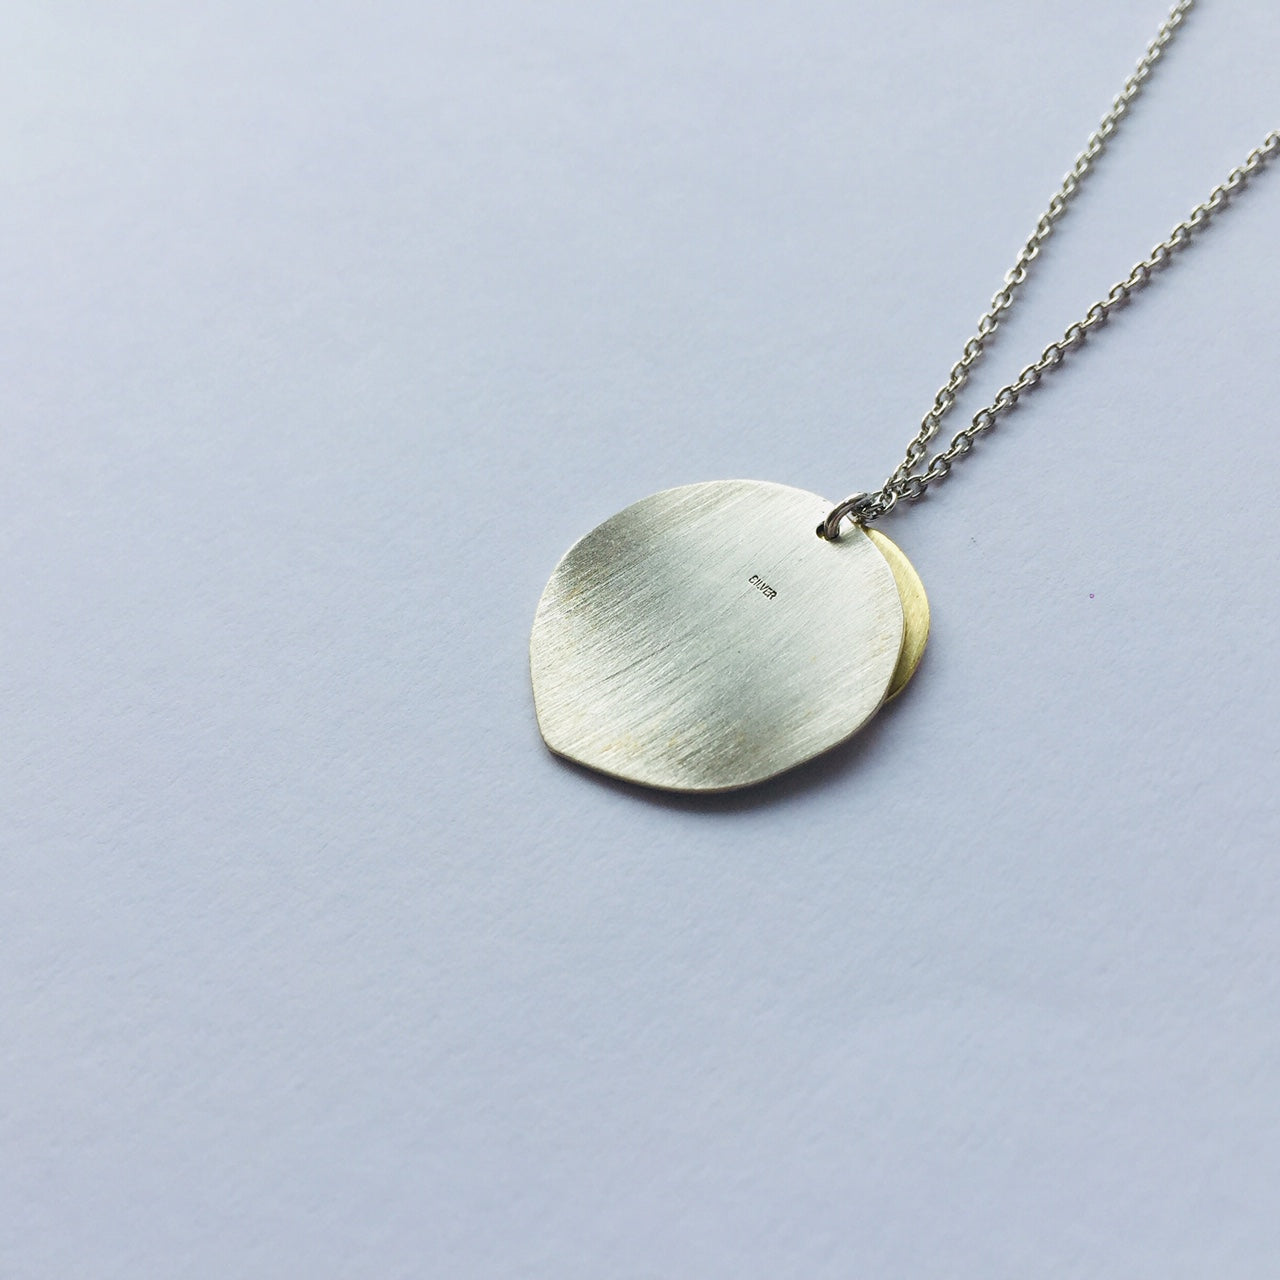 Unique Medallion / Round Combination Silver & Brass Pendant with Silver Chain Necklace コンビネーション・重ね付け・シルバー・真鍮・コインモチーフ・ネックレス・ペンダント